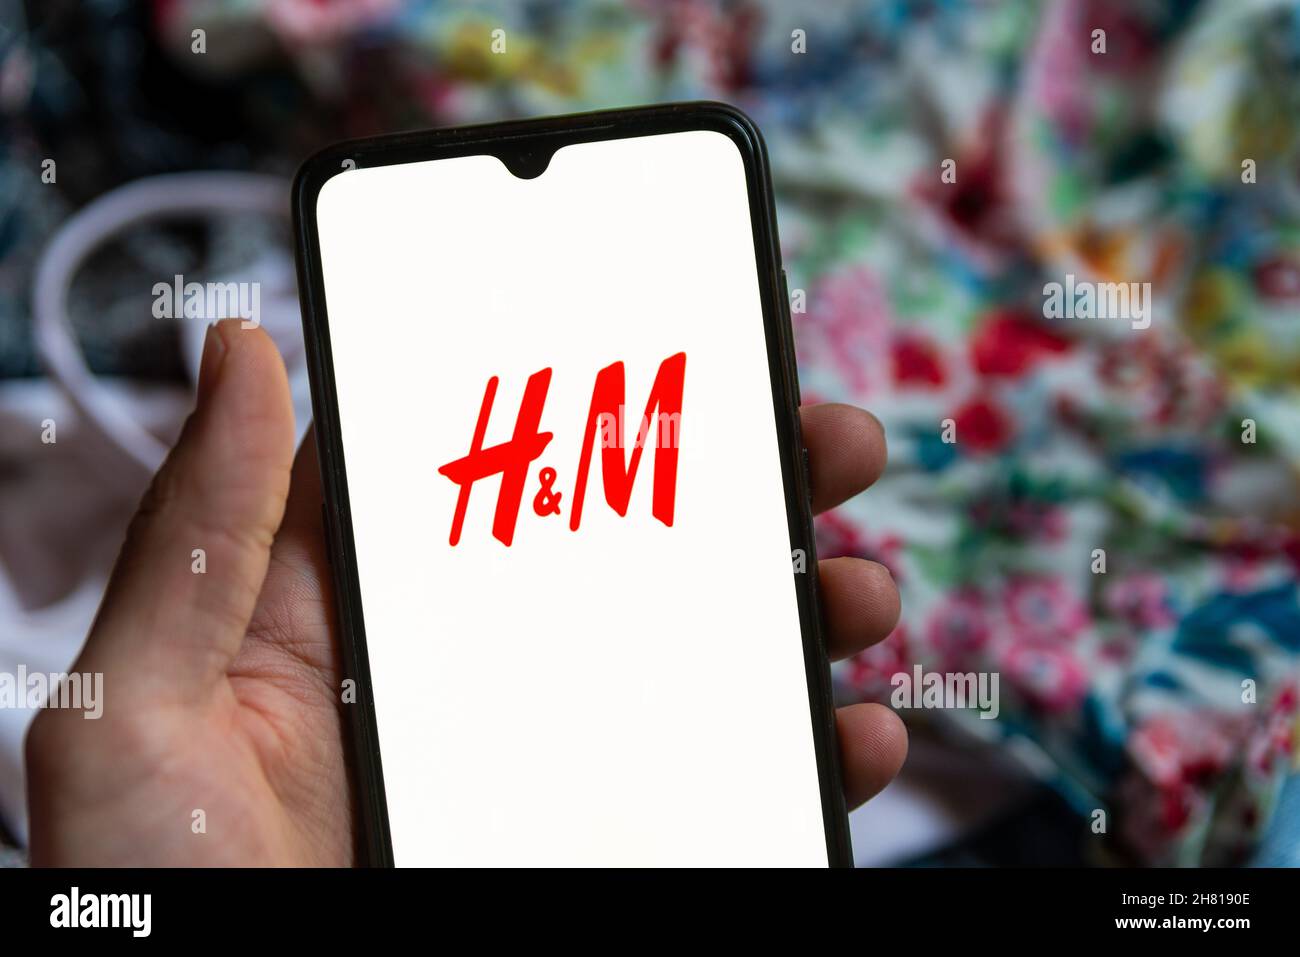 The fashion retailer H&M mobile app logo is seen on the screen of a mobile  phone in Barcelona, Spain on November 26, 2021. Online shopping is very  popular among millennials and constantly